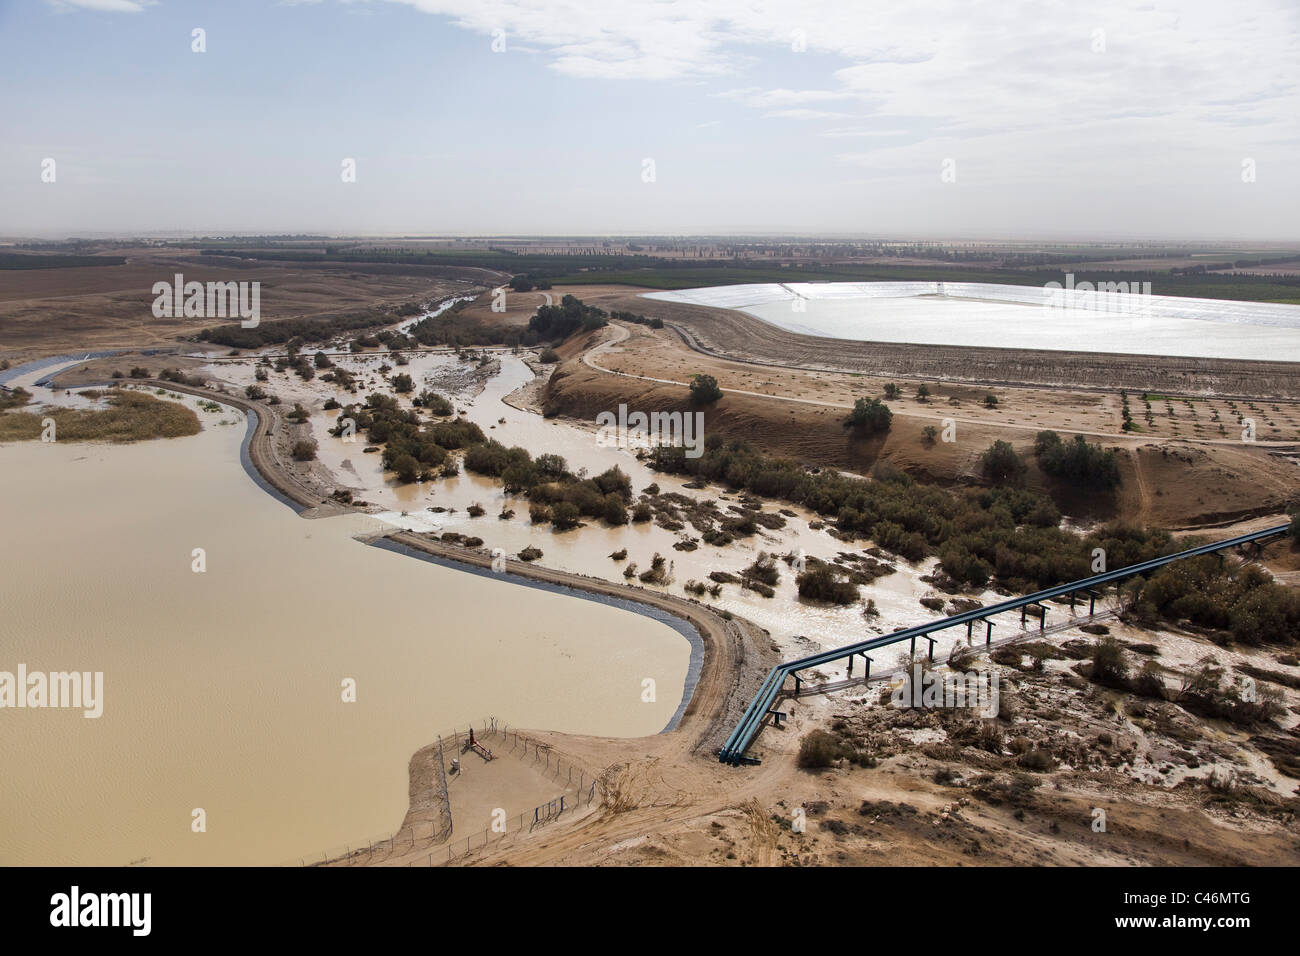 Aerial photograph of the Bsor stream after a flood in the Negev desert at winter Stock Photo